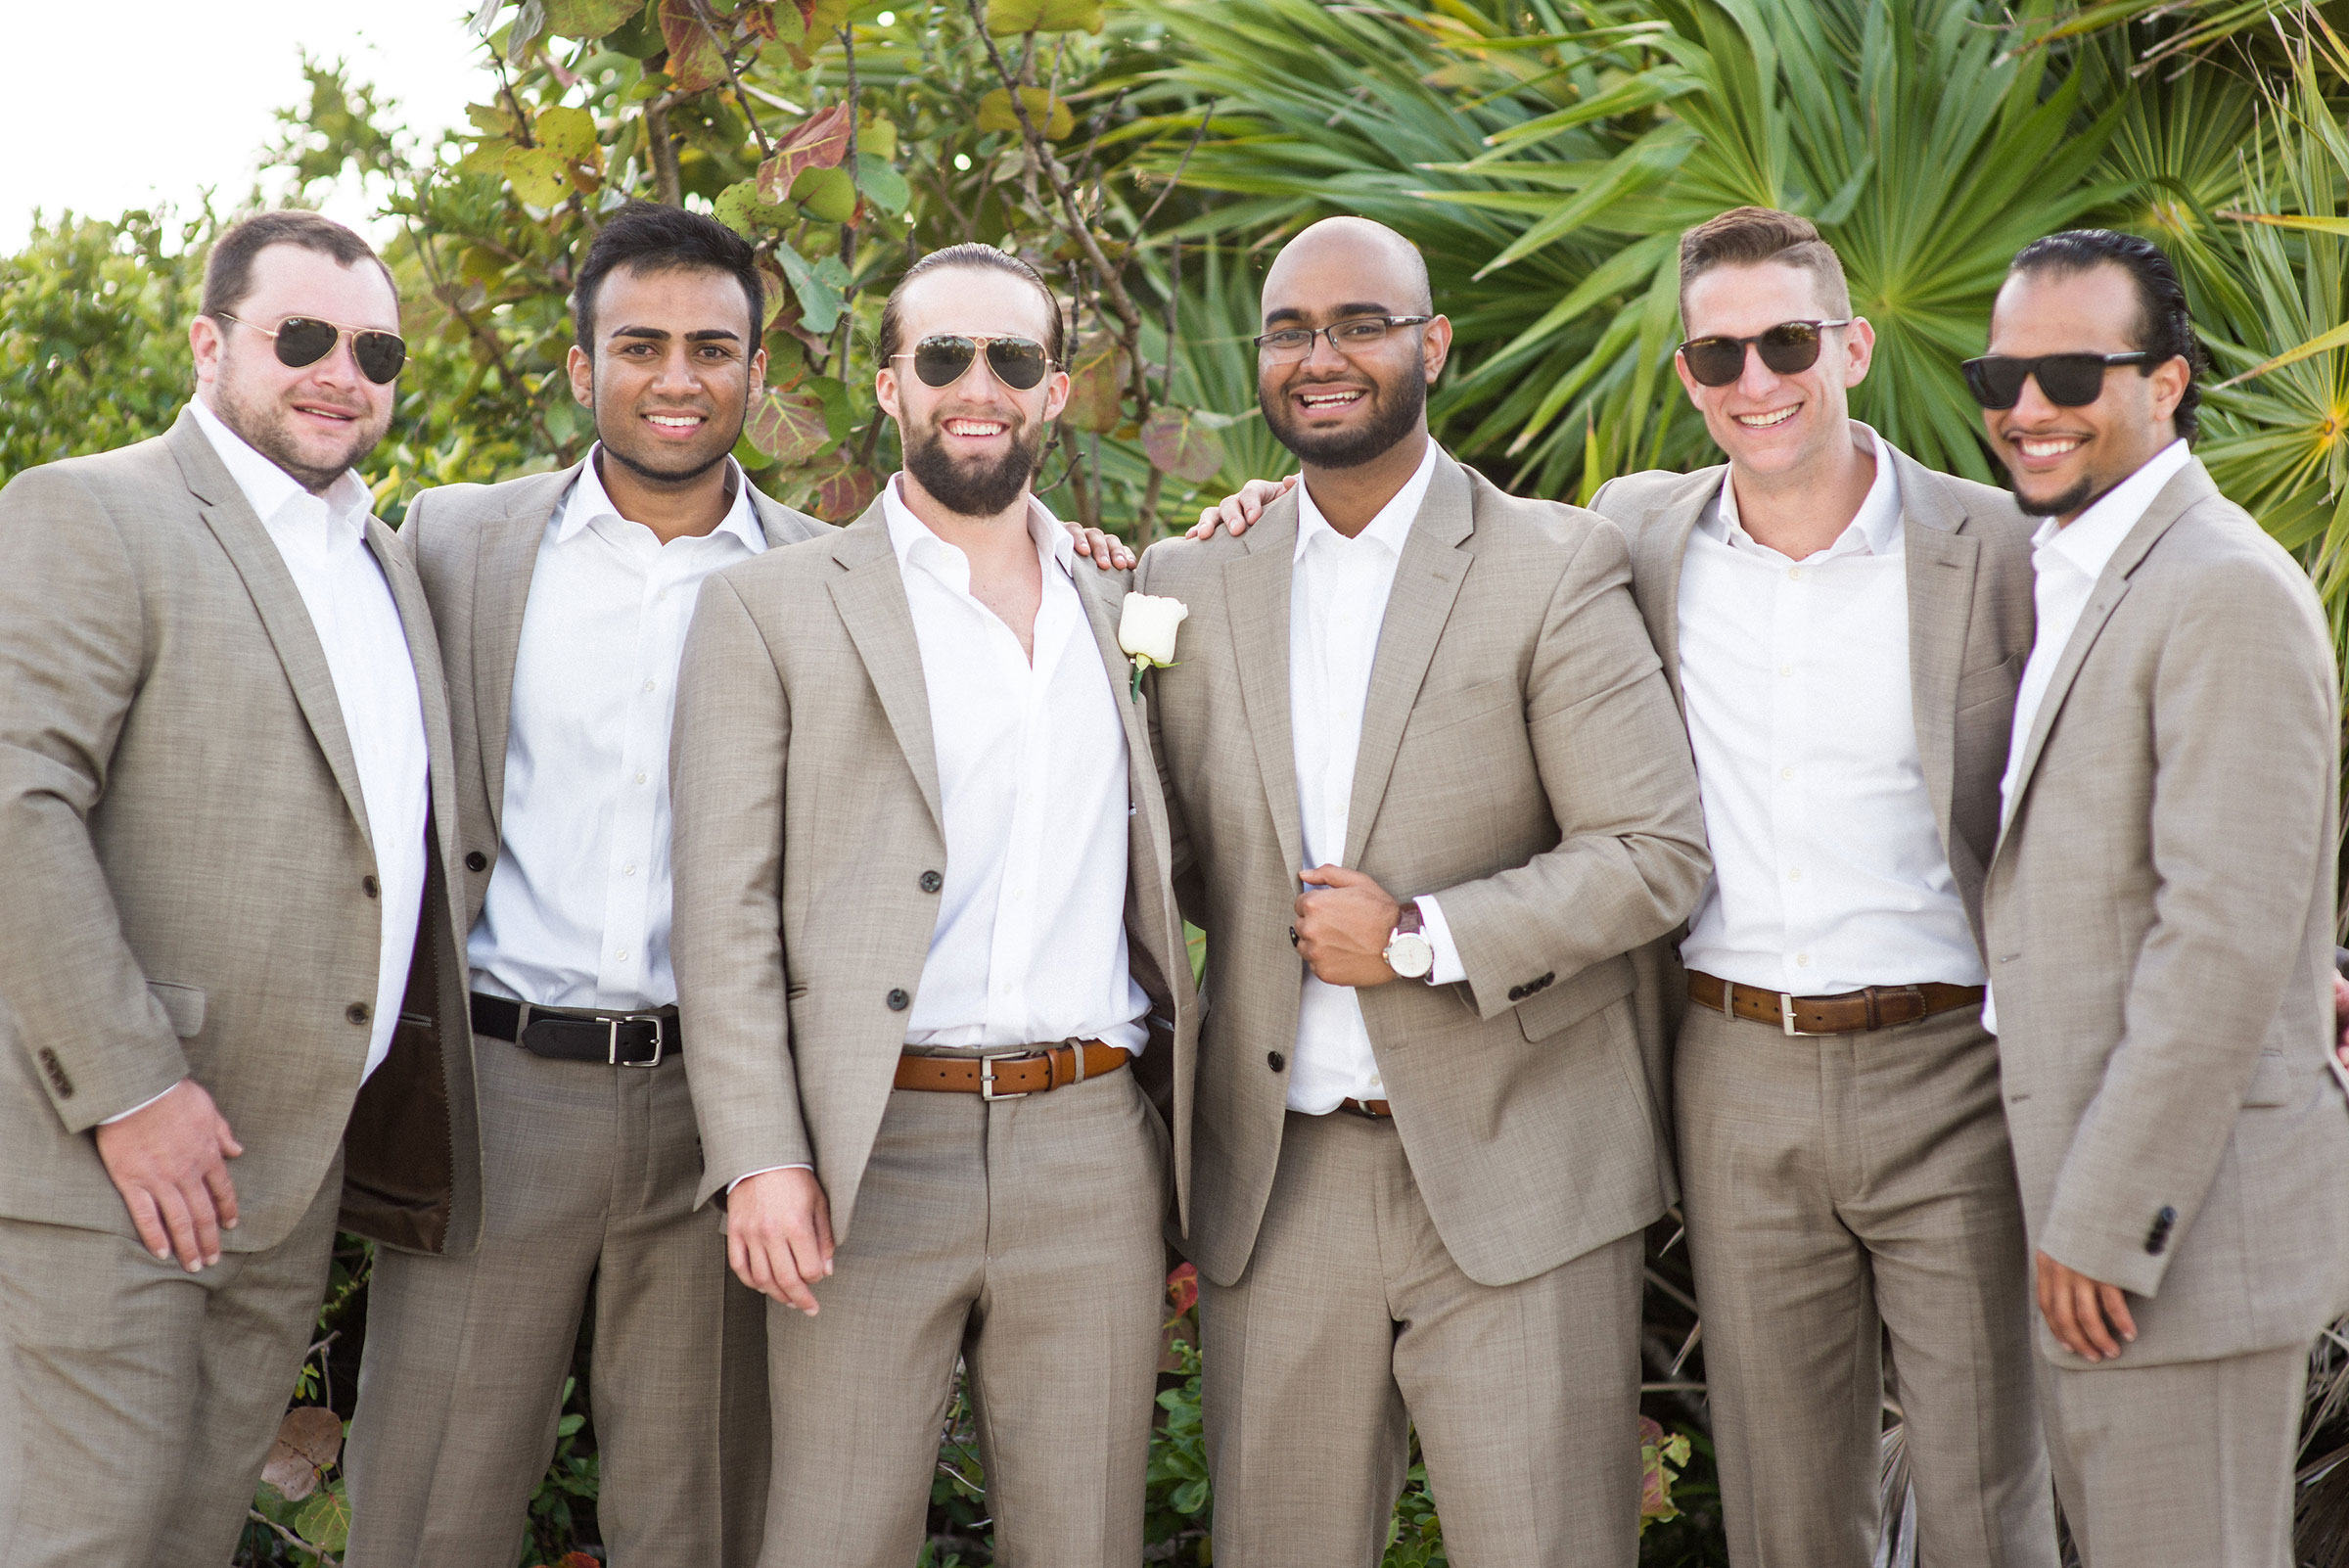 Groom and groomsmen in tan suits for beach wedding.  Destination wedding in Mexico.